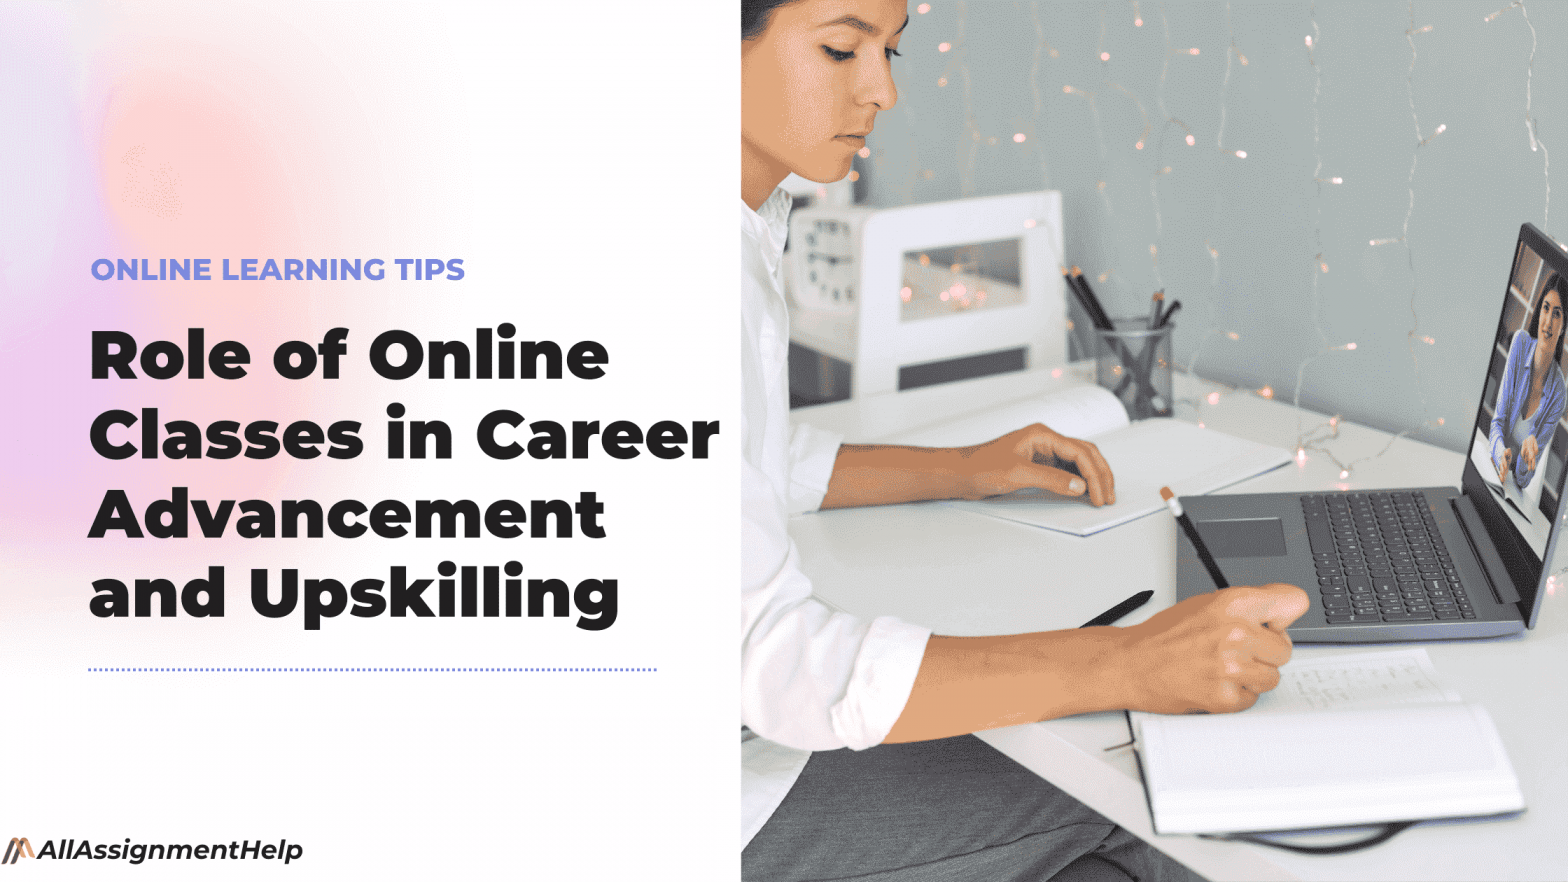 Role of Online Classes in Career Advancement and Upskilling